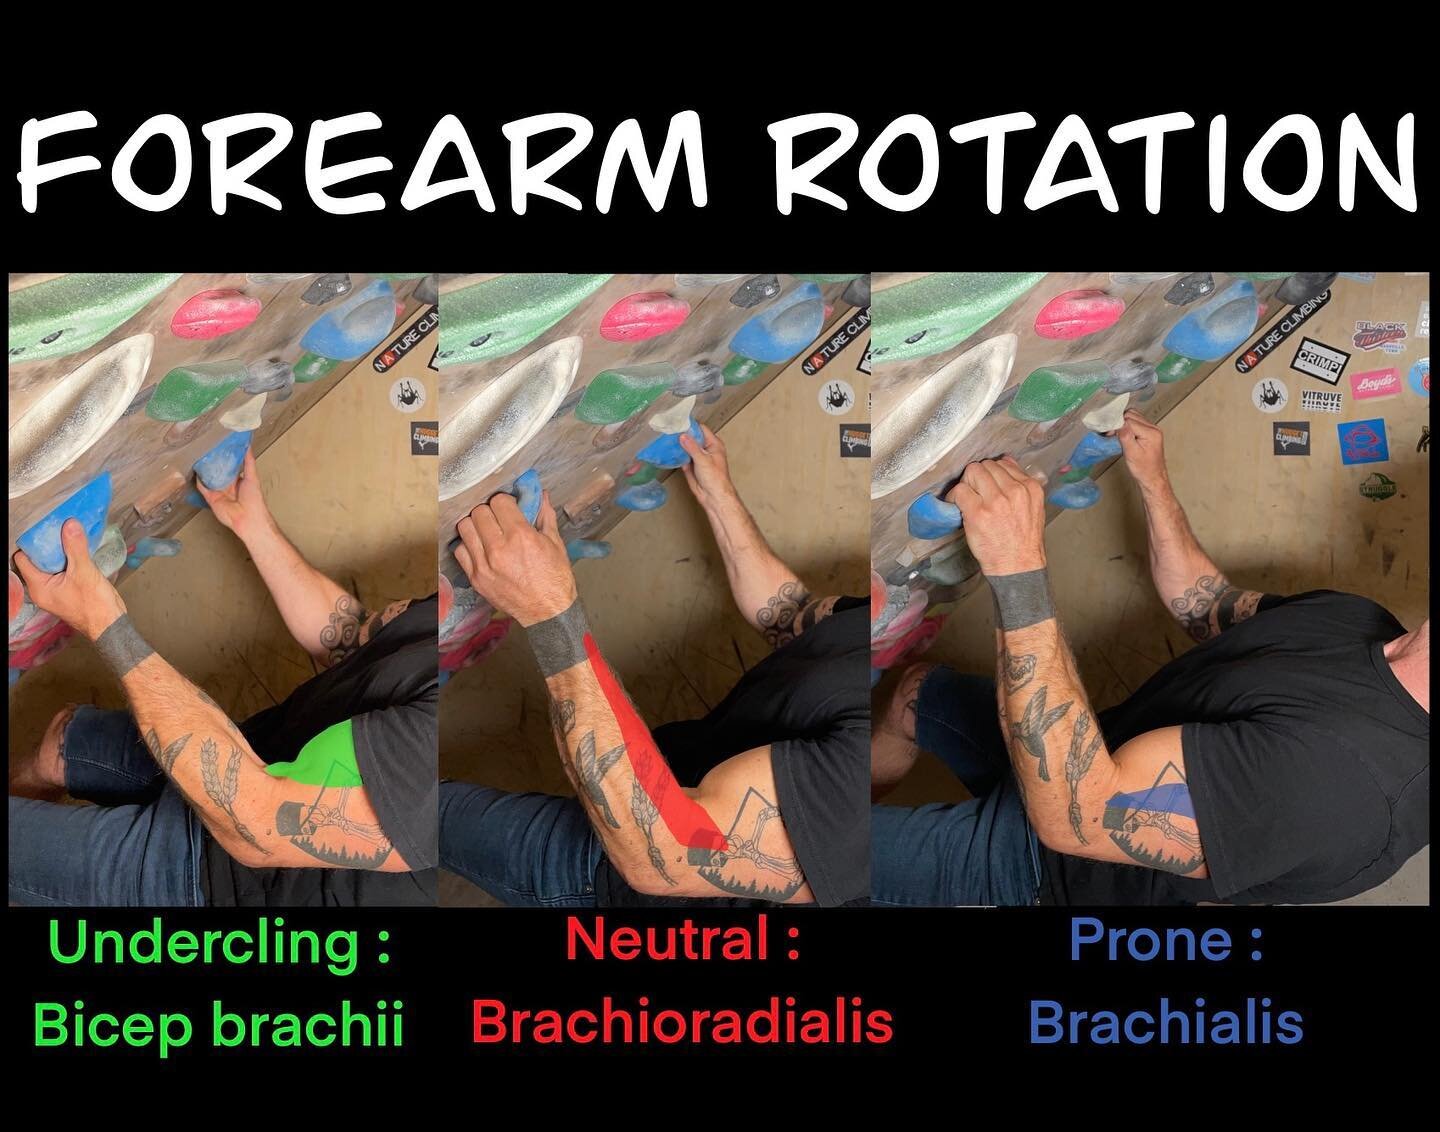 💪🏽Positional Stress 💪🏿

The stress to the elbow flexors varies with forearm rotation, and the forearm rotation varies with grip position. Therefore, we need the variety to stay resilient, but that same variety might not adequately train each. 

T